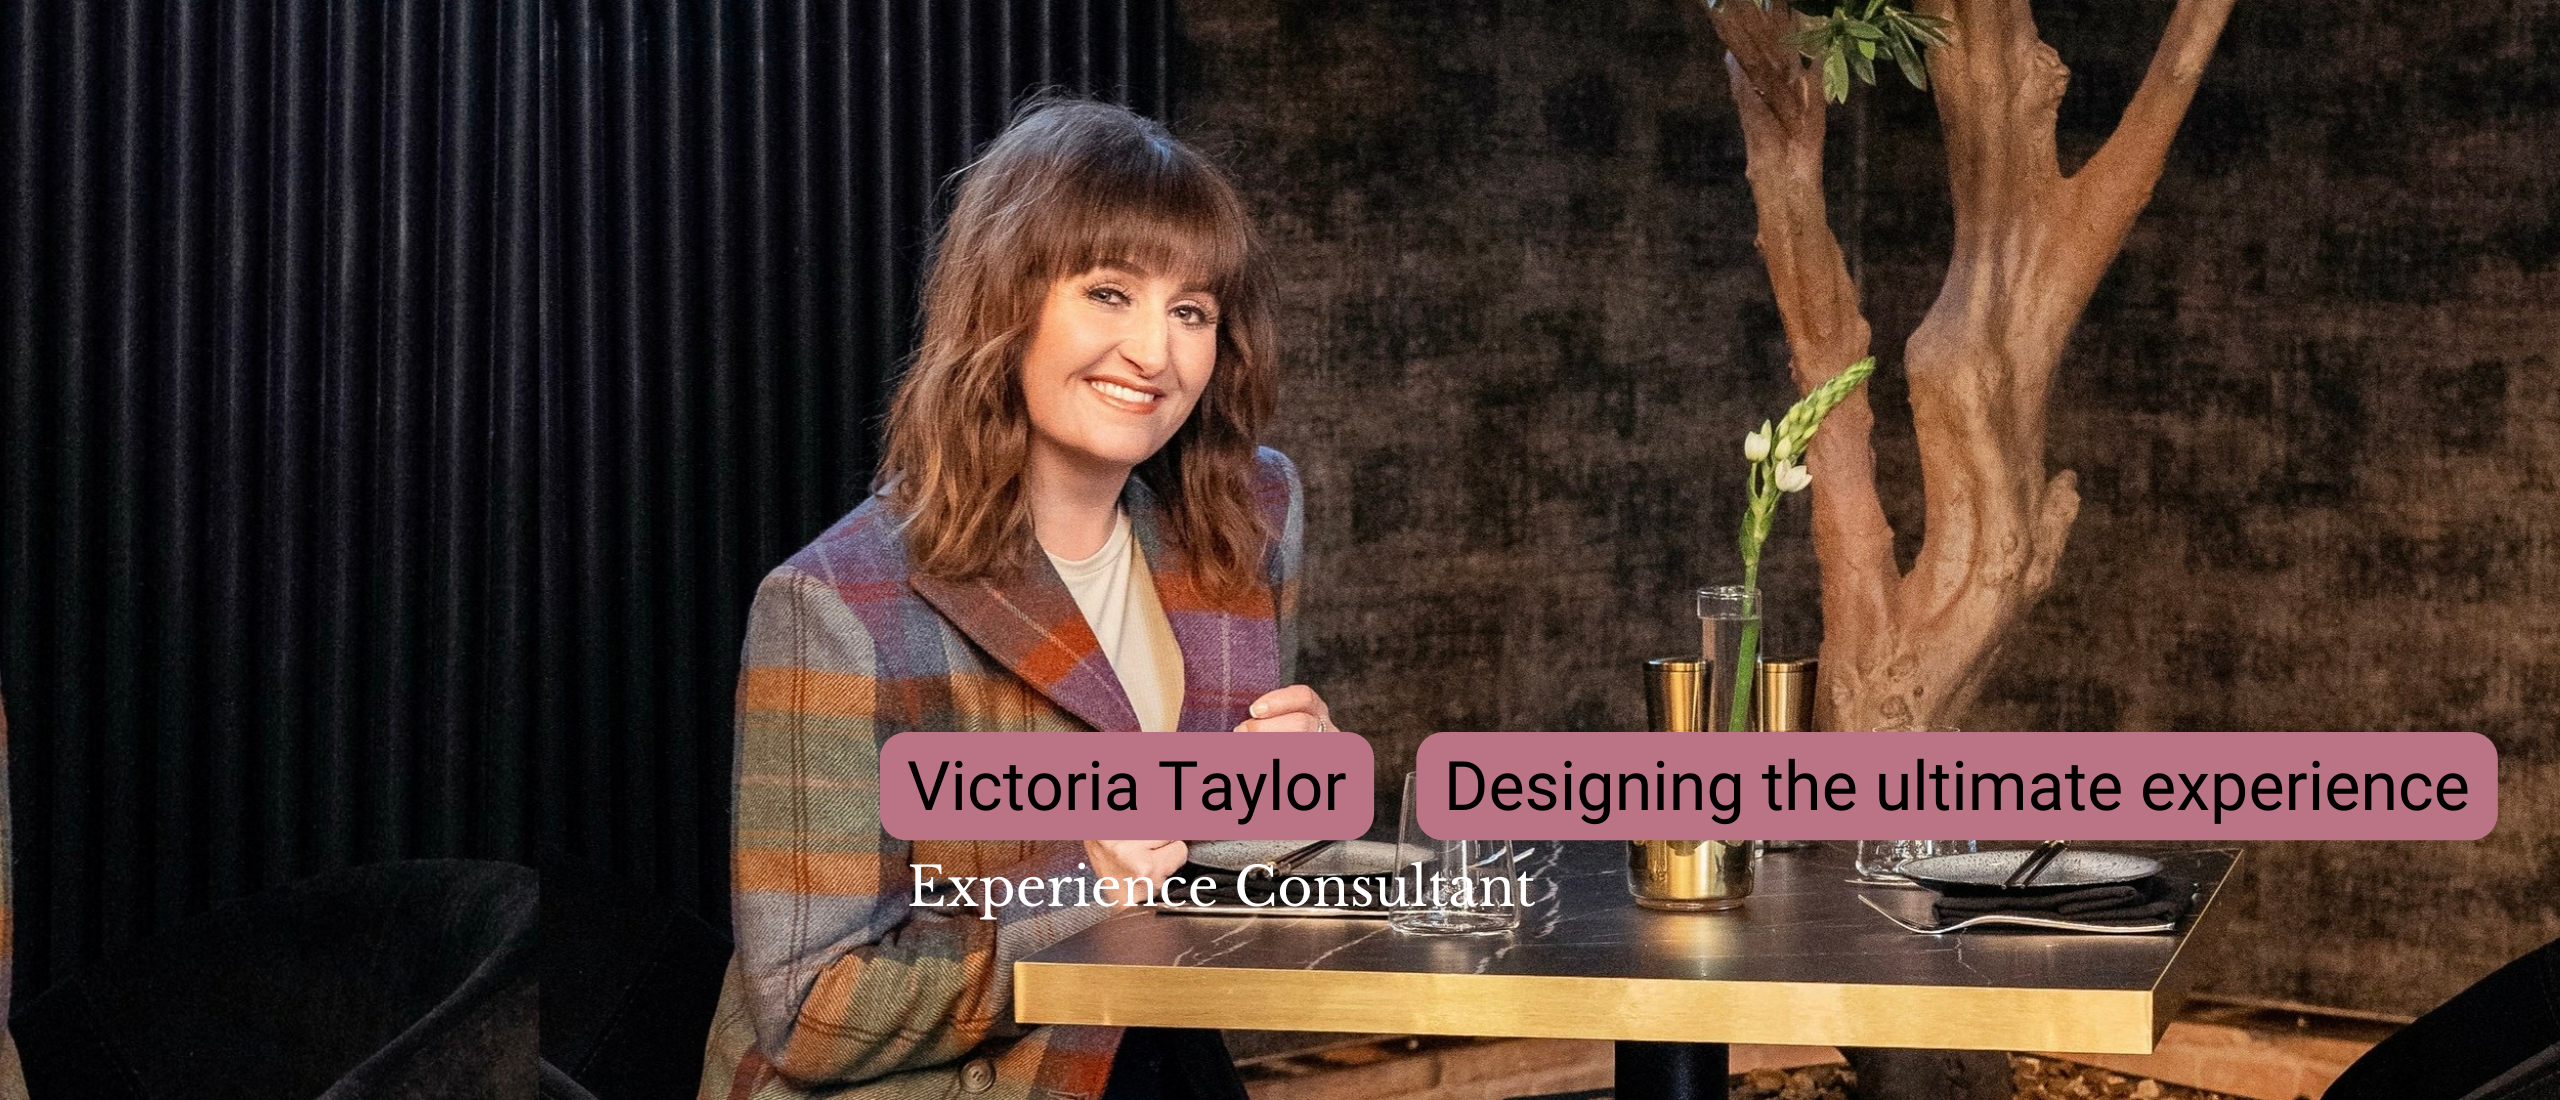 Designing experiences, one moment at a time - with Victoria Taylor